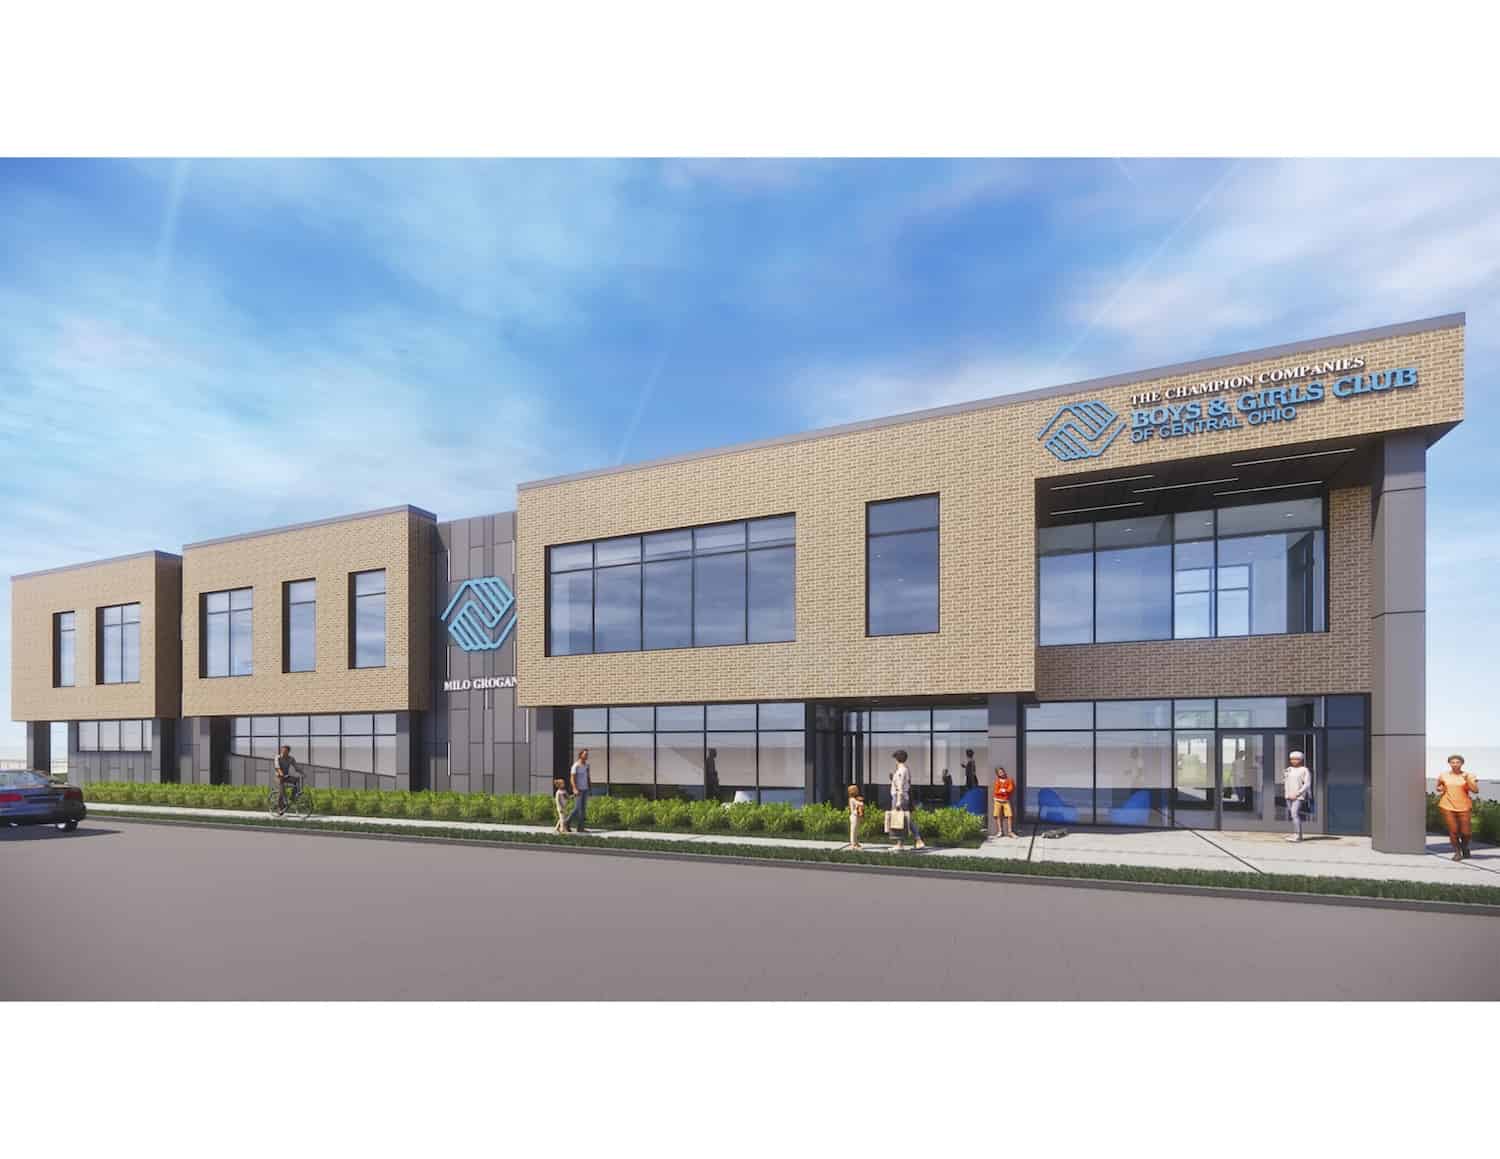 Exterior rendering of new Boys and Girls Club development